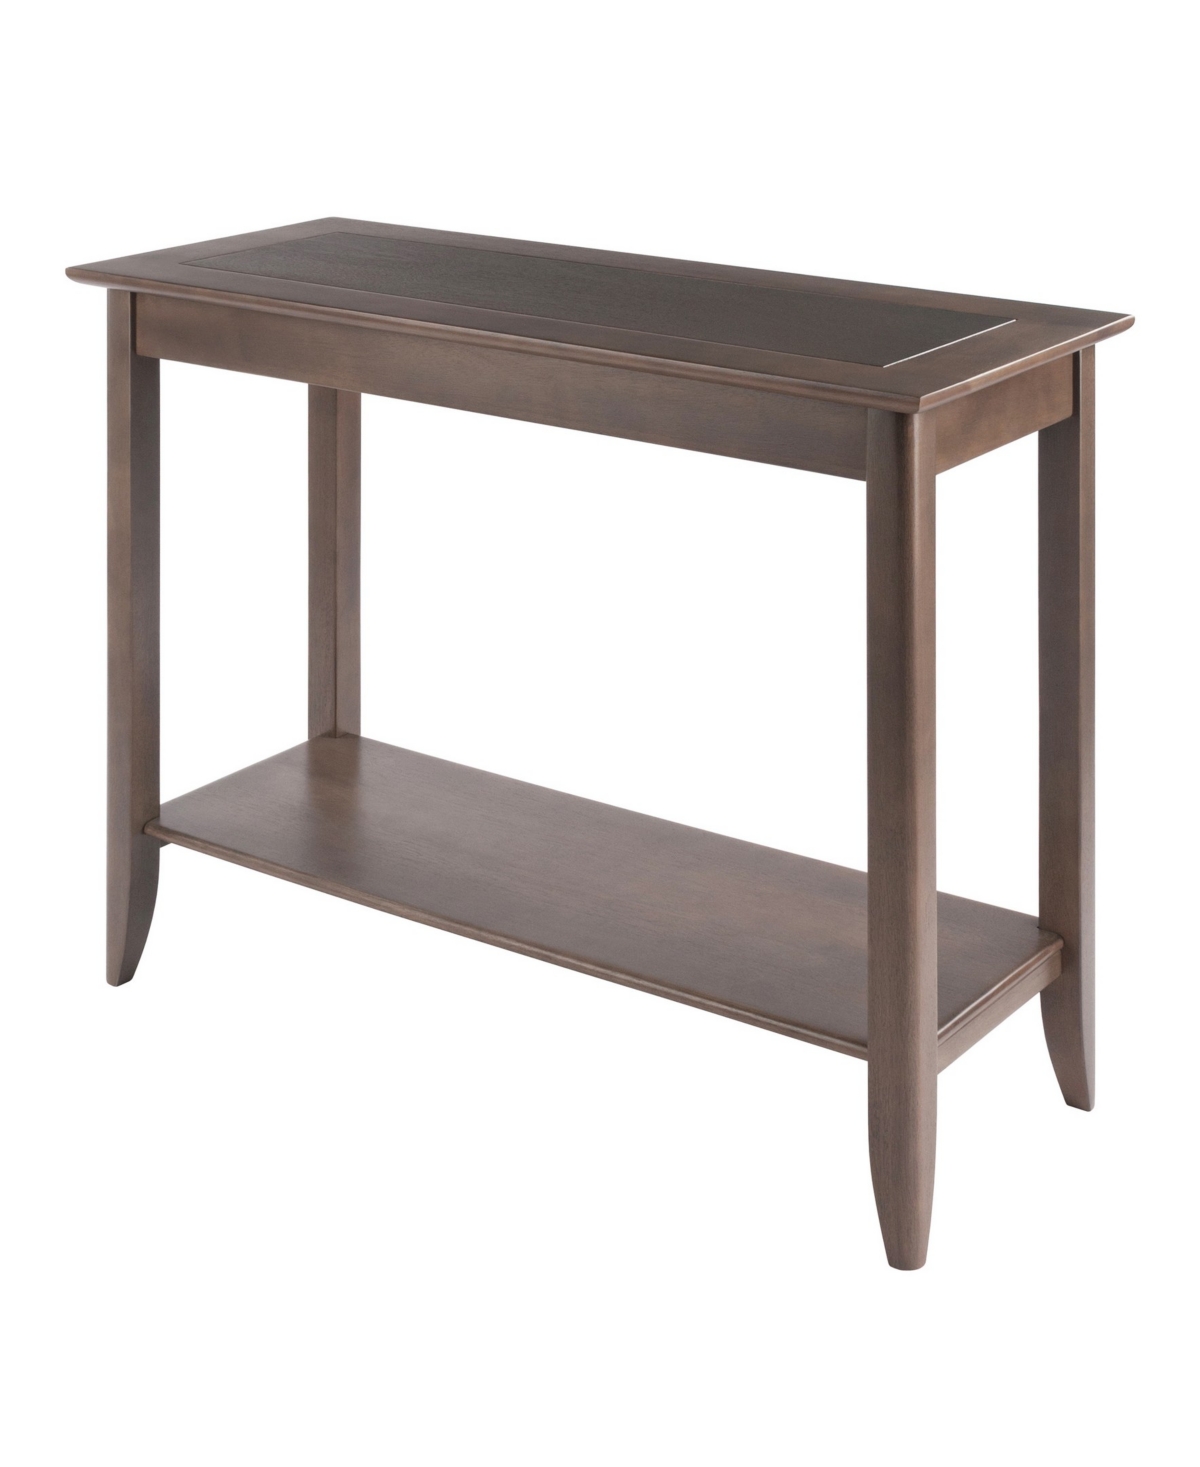 Winsome Santino 30" Wood Console Hall Table In Oyster Gray